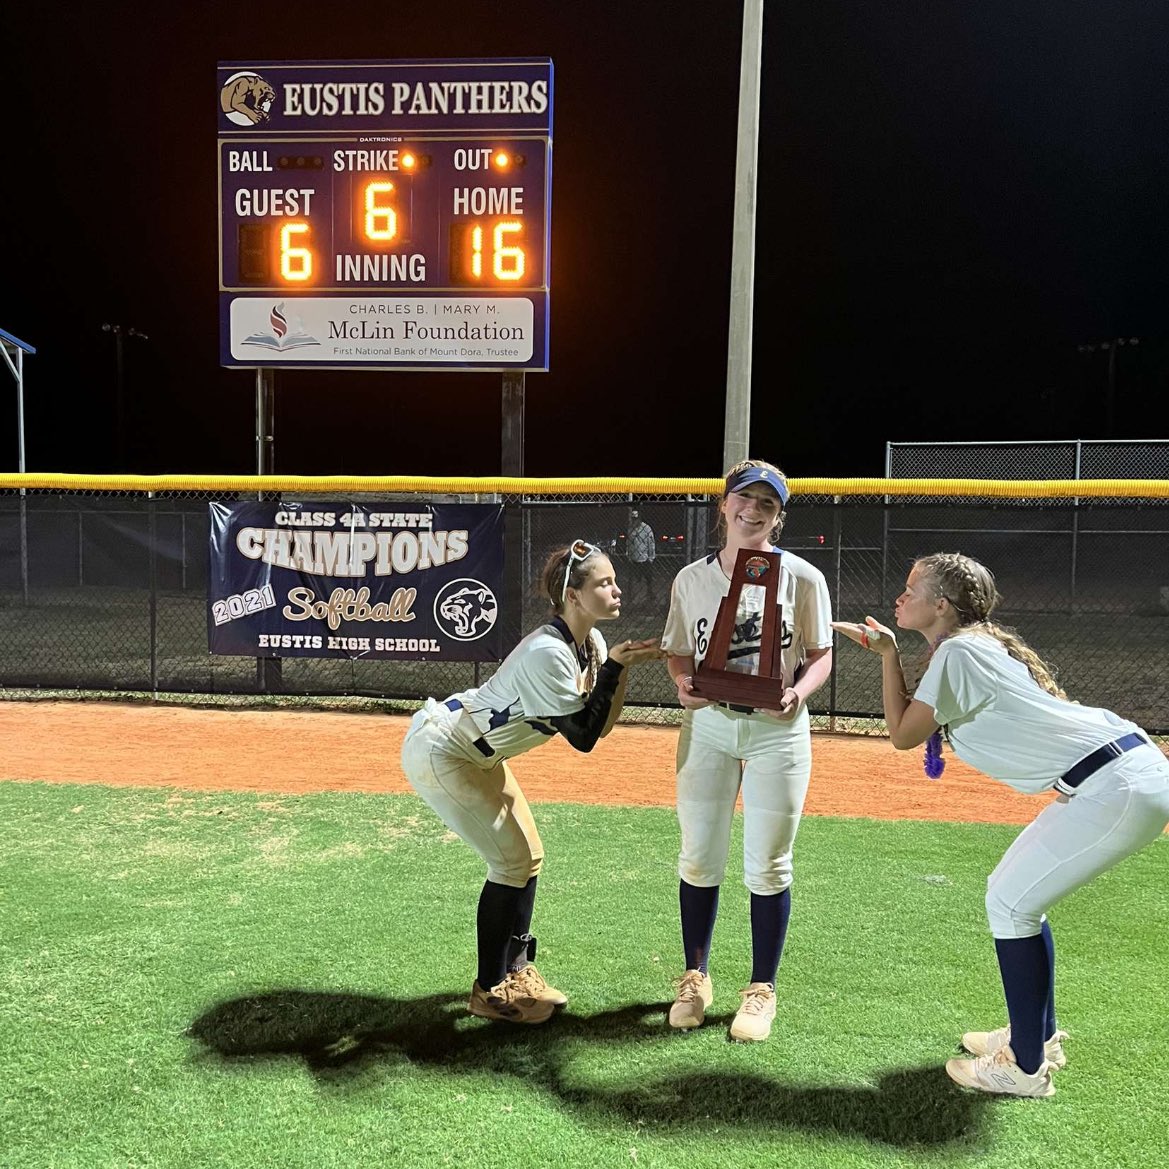 Eustis Lady Panthers do it again!!! DISTRICT CHAMPS!!!🏆 So proud of my team, now we’re on to the next!!! @bbeall0628 @TopPreps @nxtsportsagency @SBRRetweets @Faith4Fastpitch @SoftballDown @CoastRecruitsSB @UWAA_United